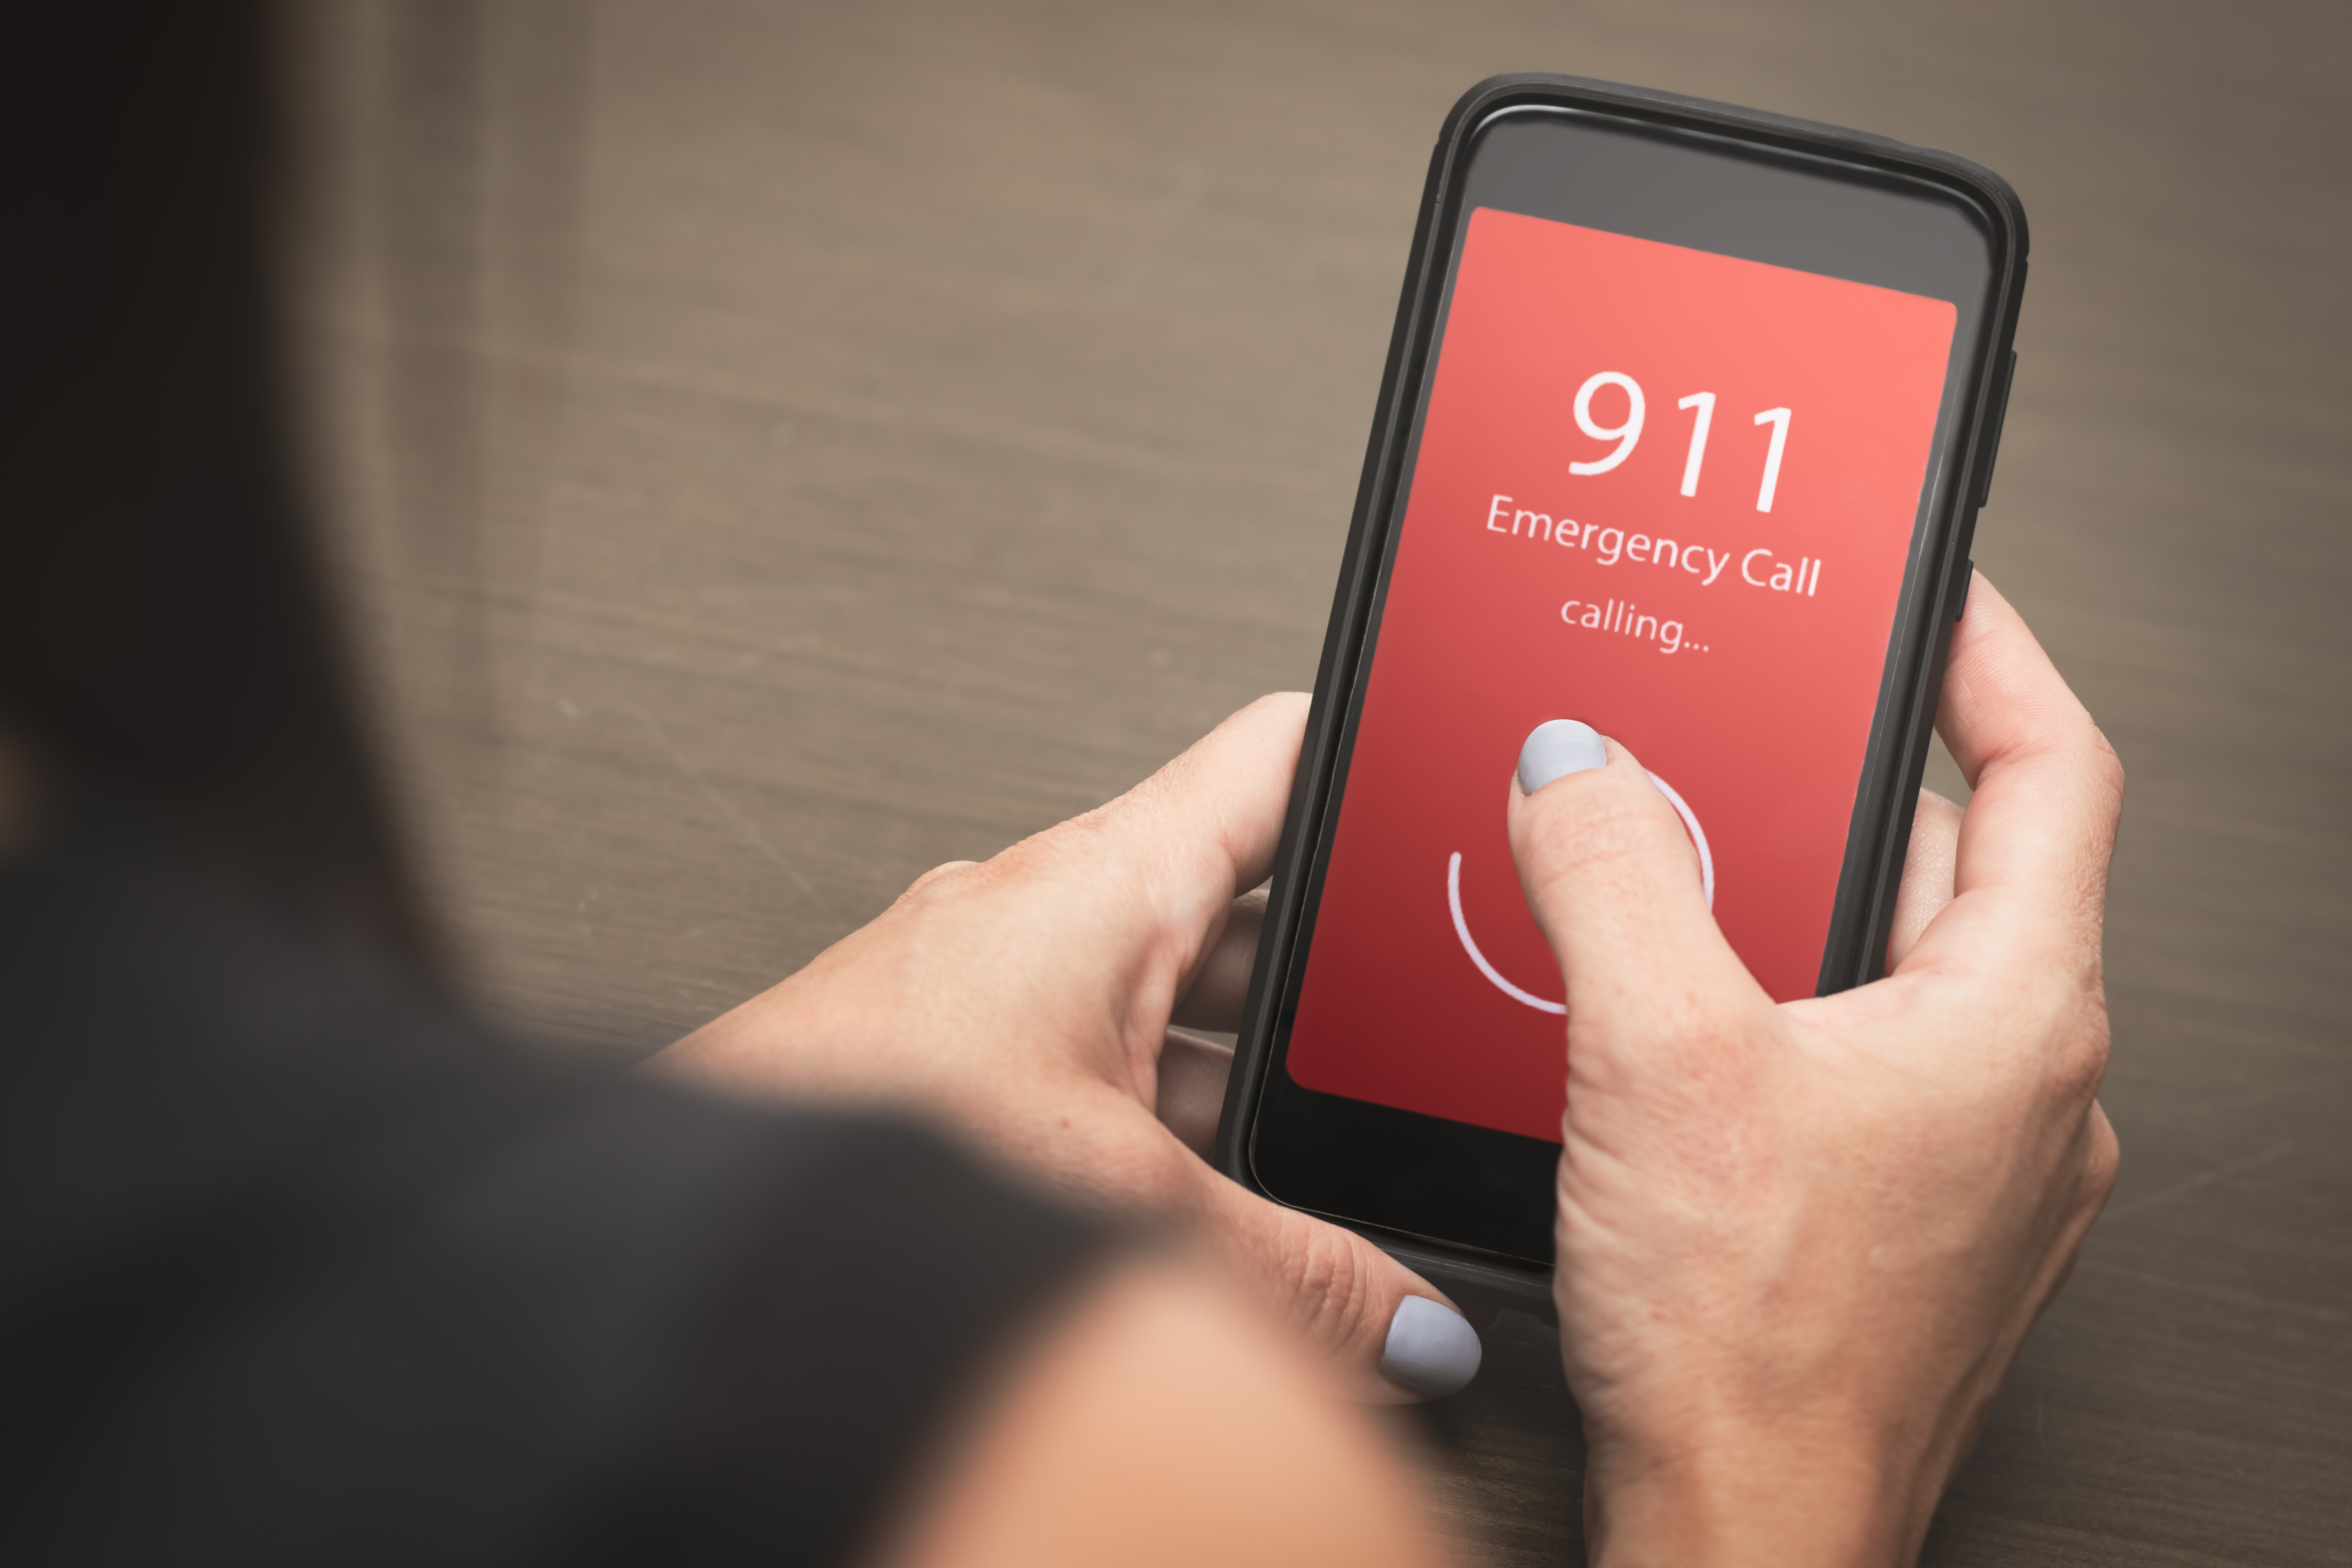 Emergency call to 911 from mobile | Source: Shutterstock